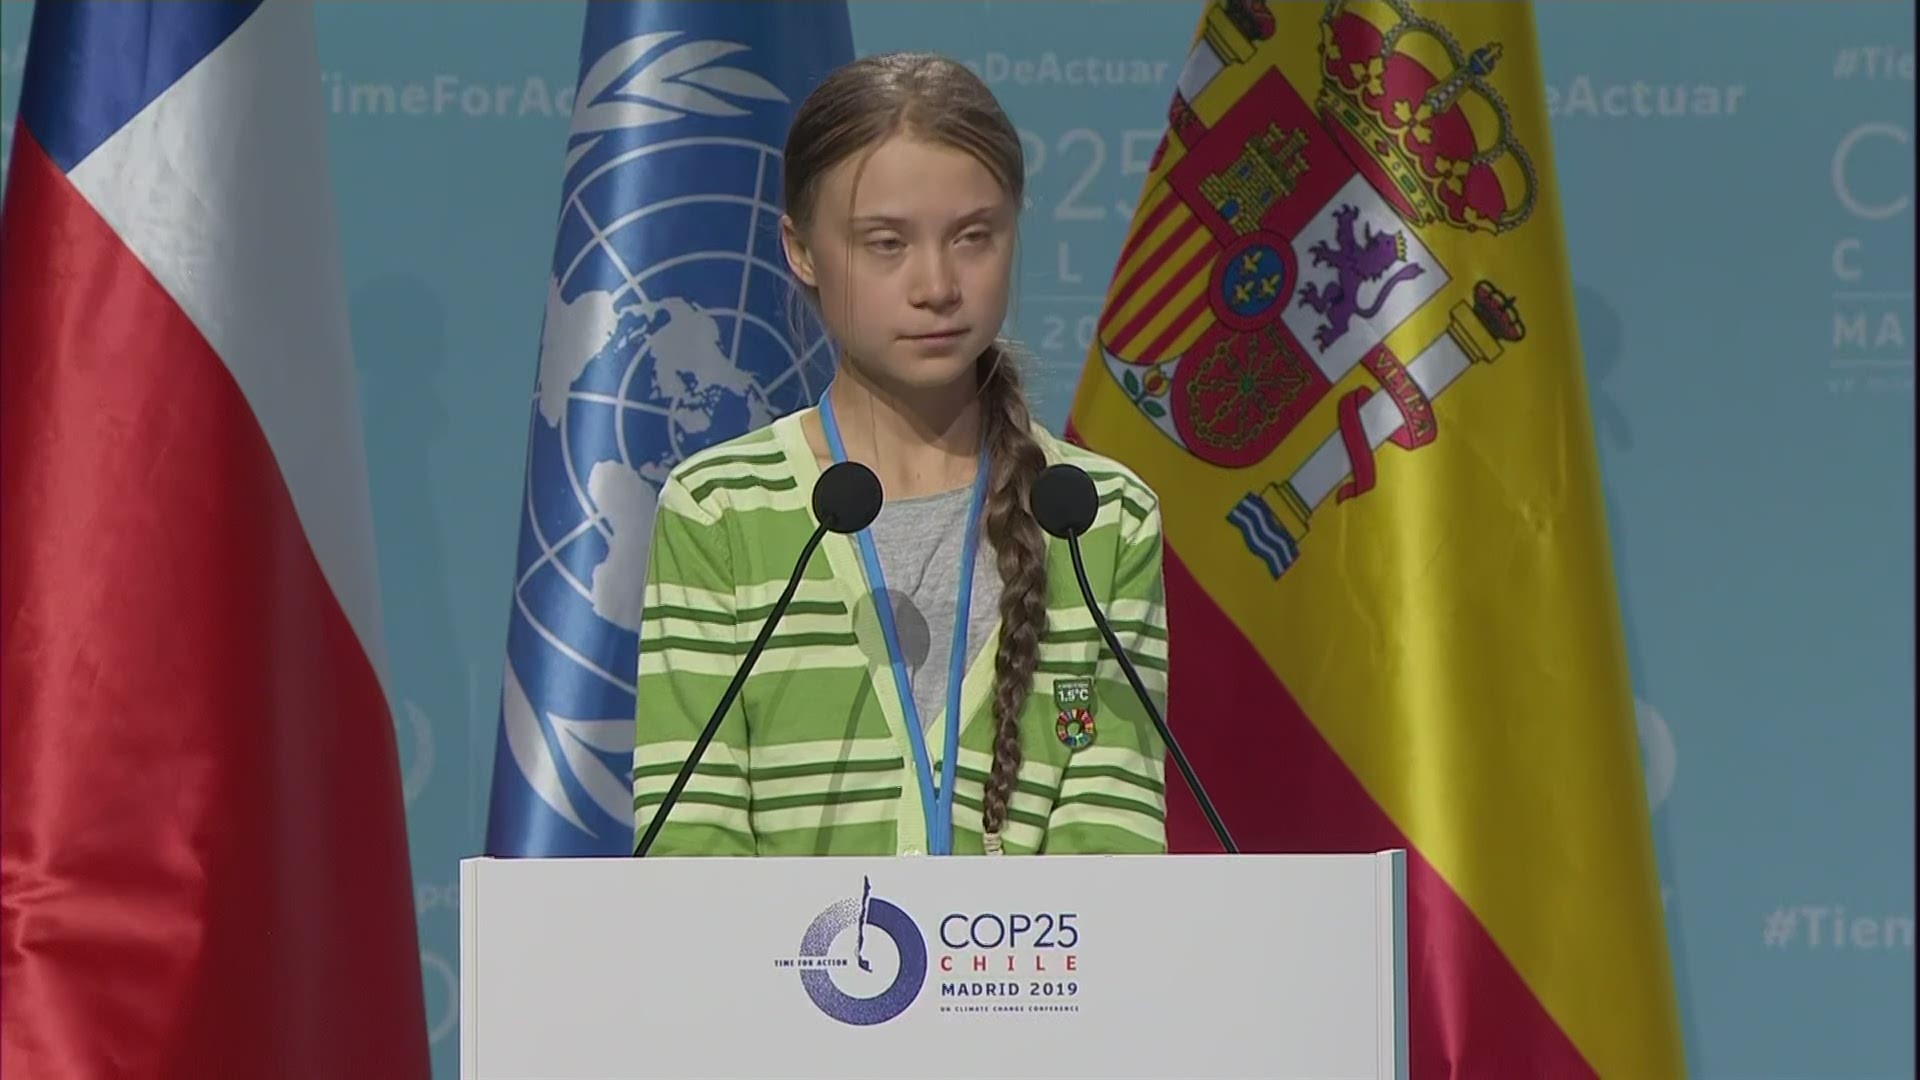 Swedish activist Greta Thunberg said that 'we no longer have time to leave out the science,' as she gave a speech at the U.N. global climate conference in Madrid on